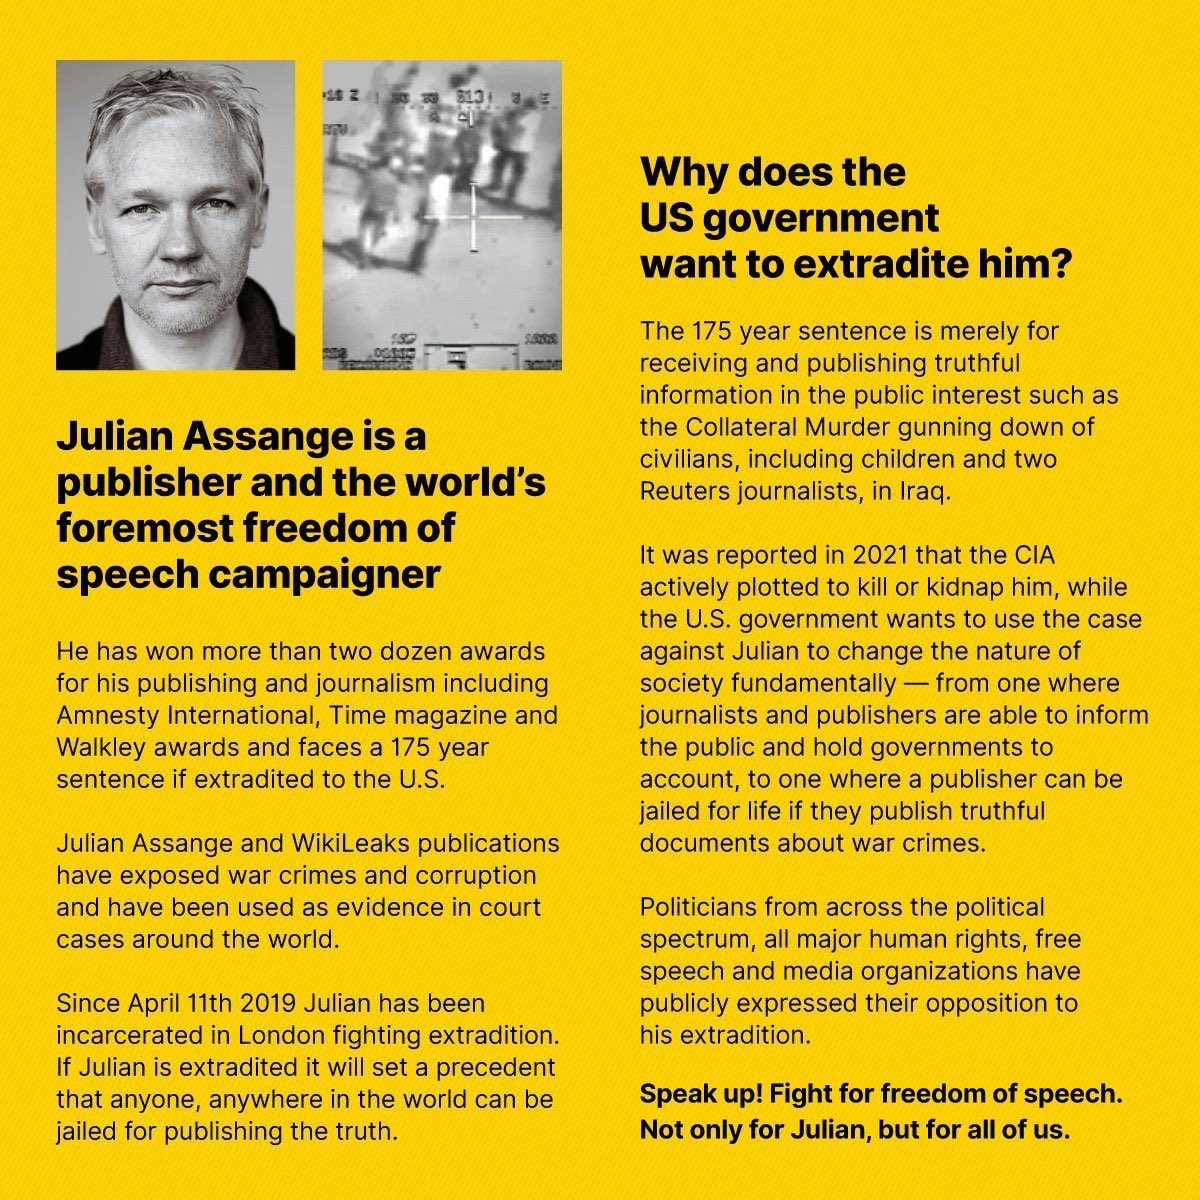 Why does the US government want to extradite Julian Assange? Julian Assange a journalist and publisher of WikiLeaks - the world's foremost freedom of speech campaigner, whose extradition is sought for exposing war crimes and corruption #FreeAssange UK court decision TODAY